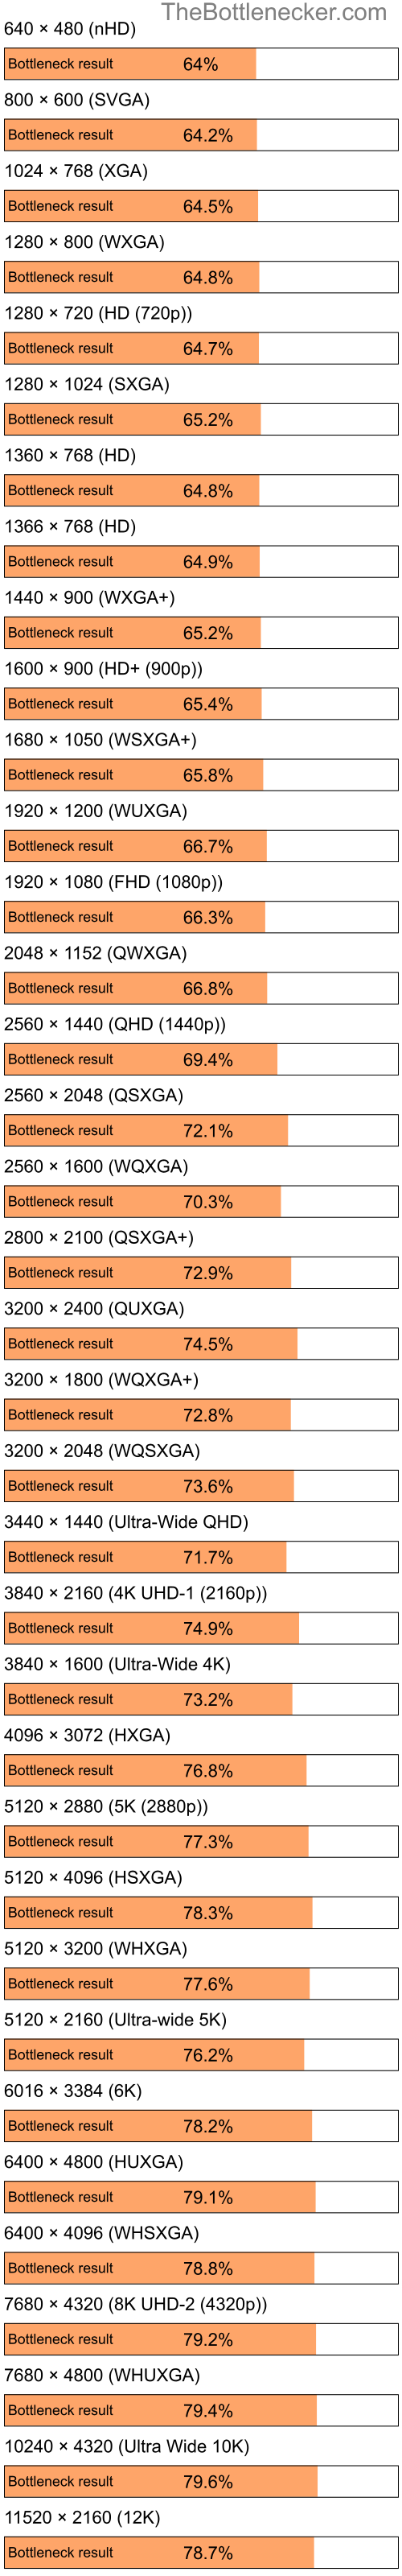 Bottleneck results by resolution for Intel Atom N270 and NVIDIA GeForce 9300 GS in7 Days to Die